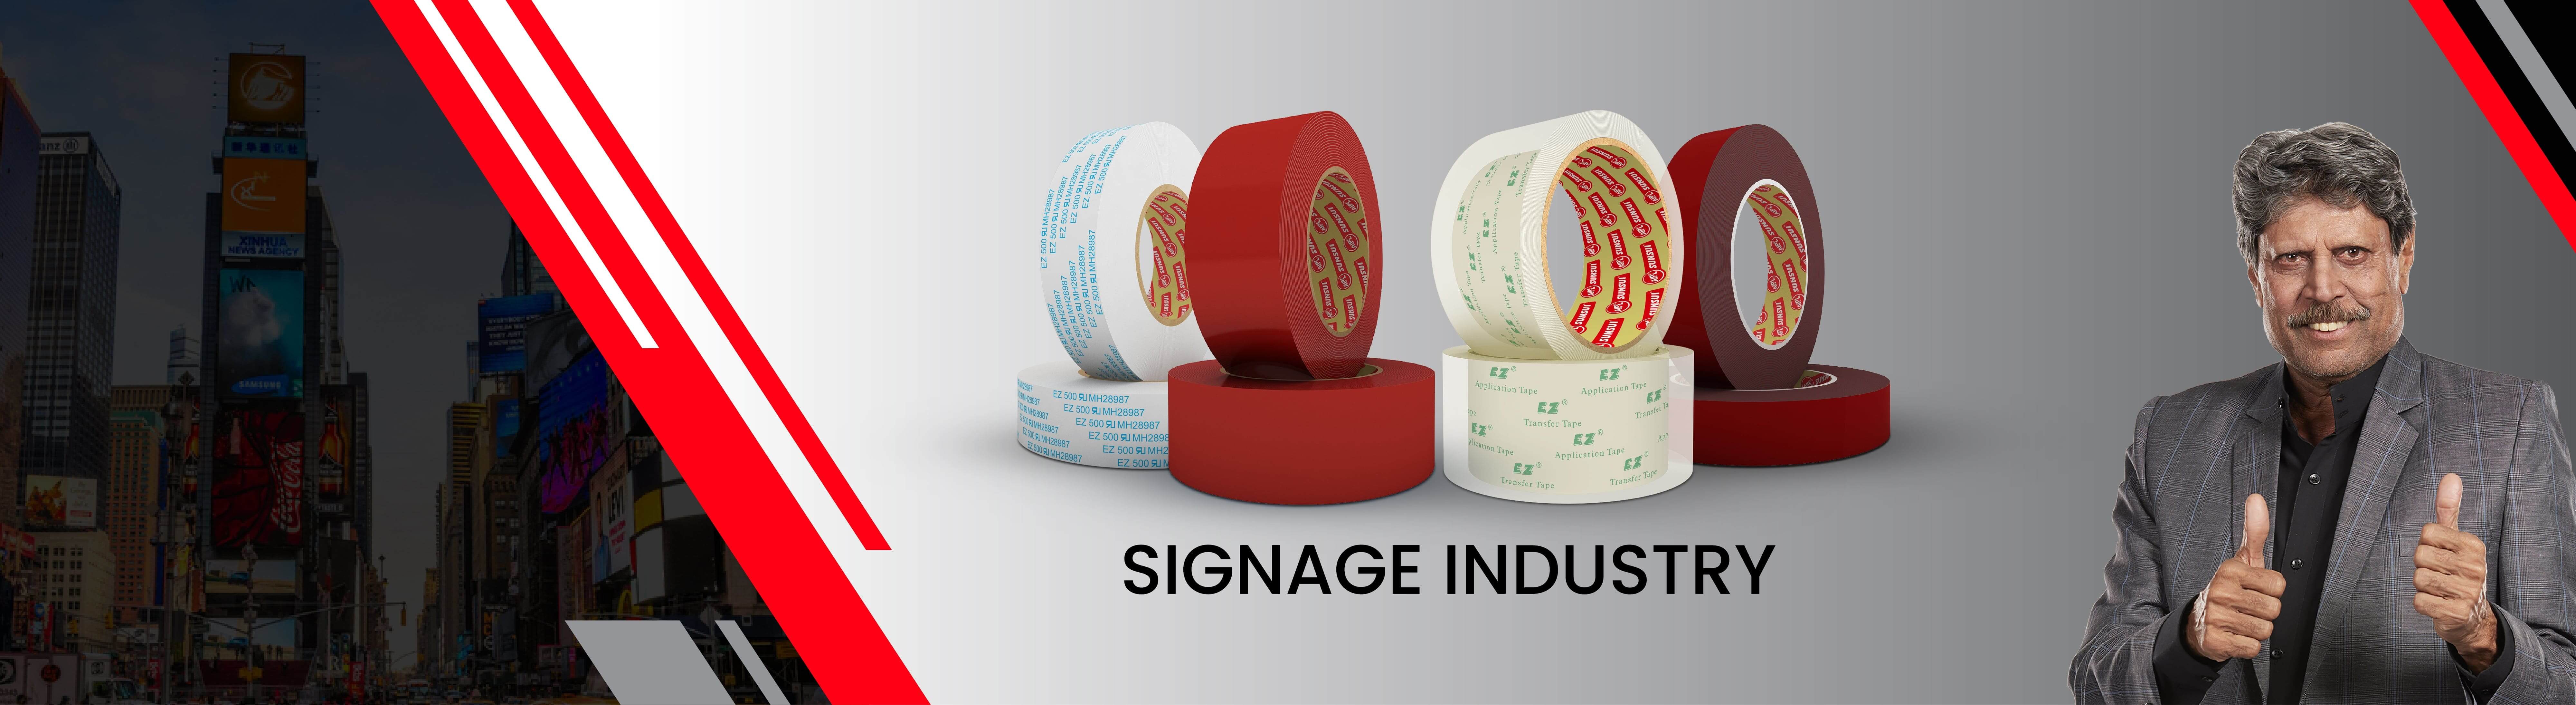 SIGNAGE industry